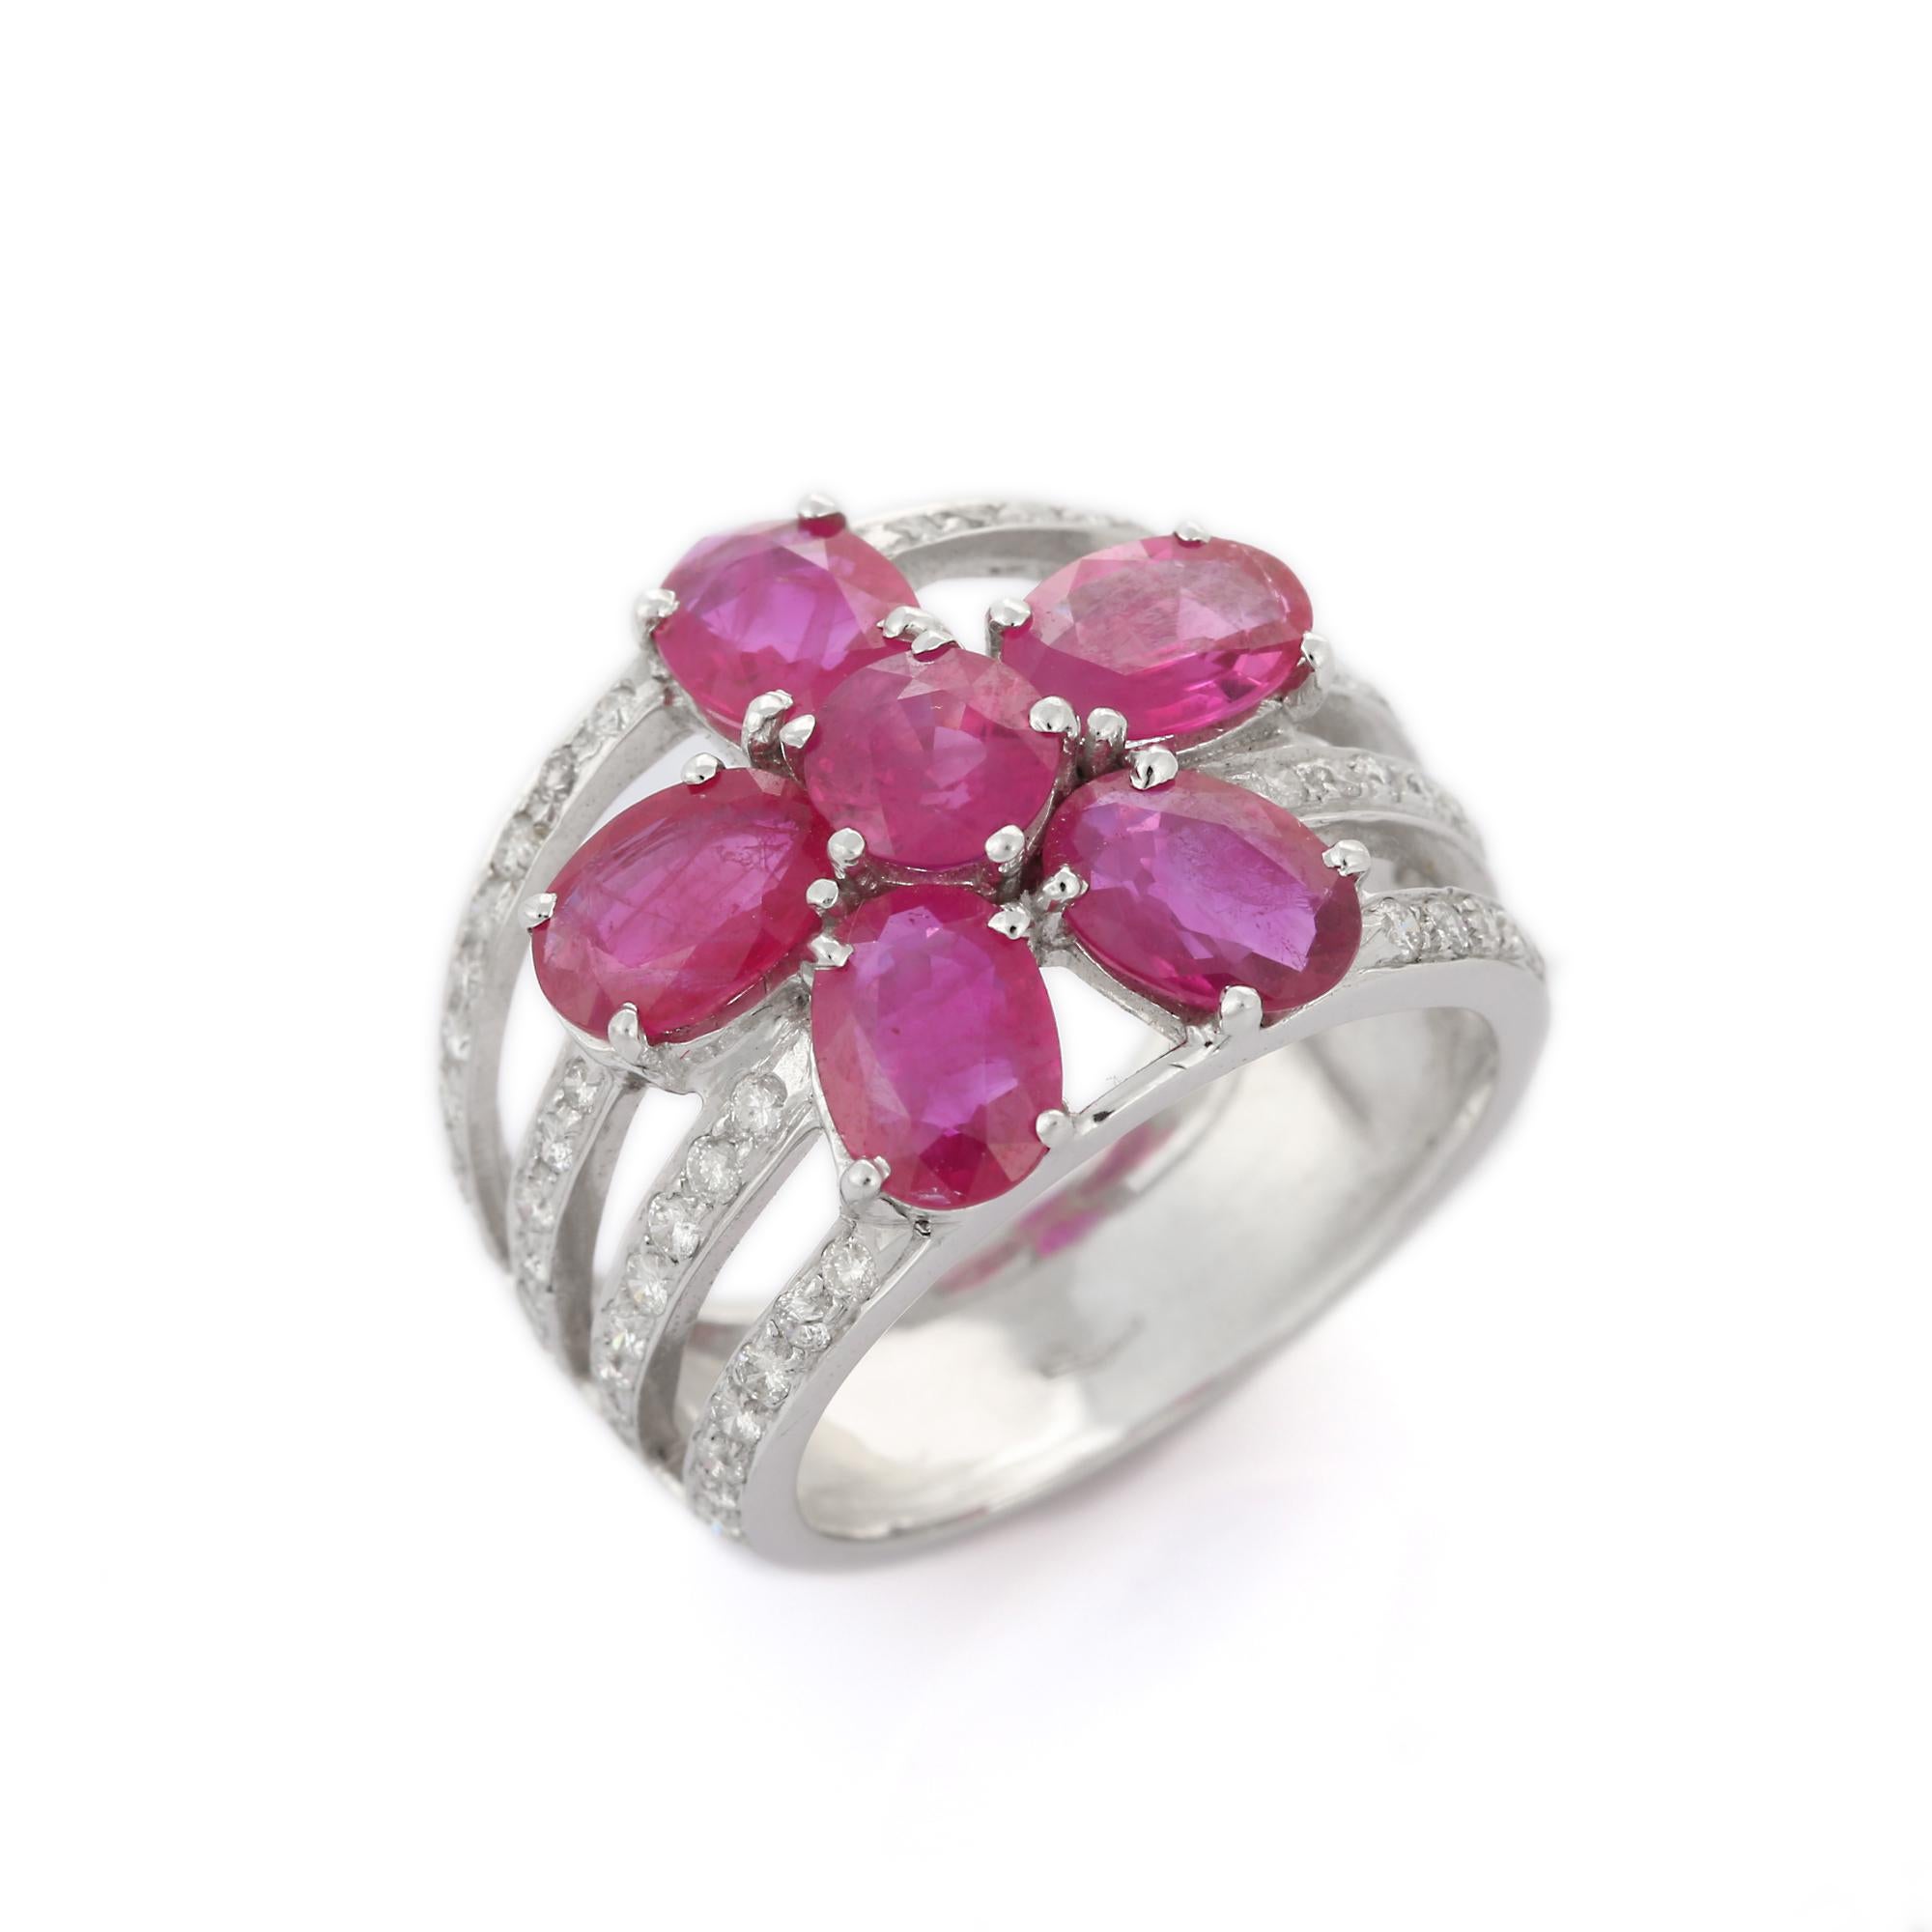 For Sale:  5.1 Ct Ruby Statement Flower Ring with Diamonds 18k Solid White Gold 3